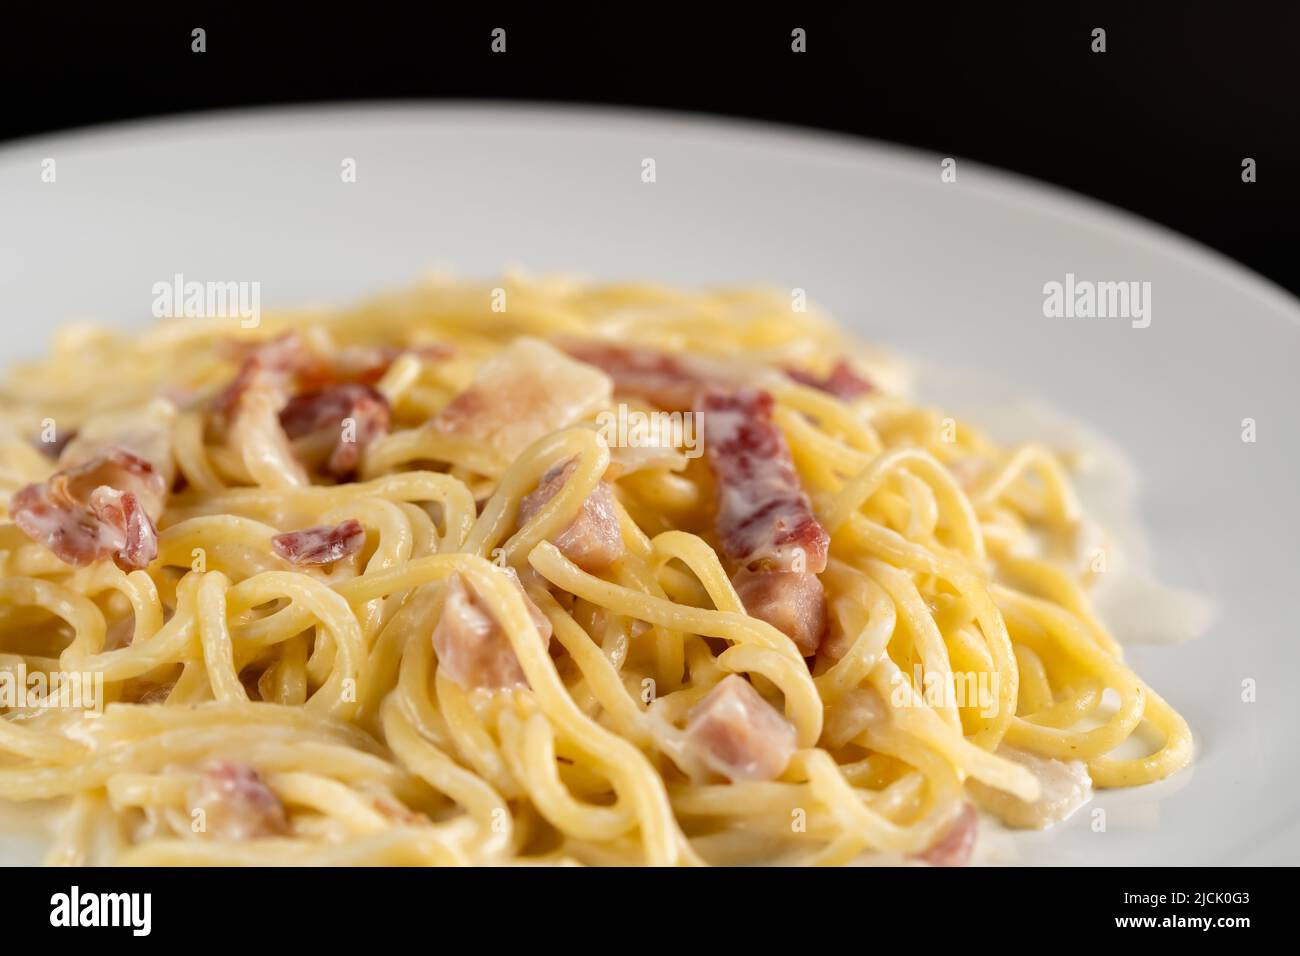 carbonara spaghetti with cream in white plate on a balck backgroud Stock Photo